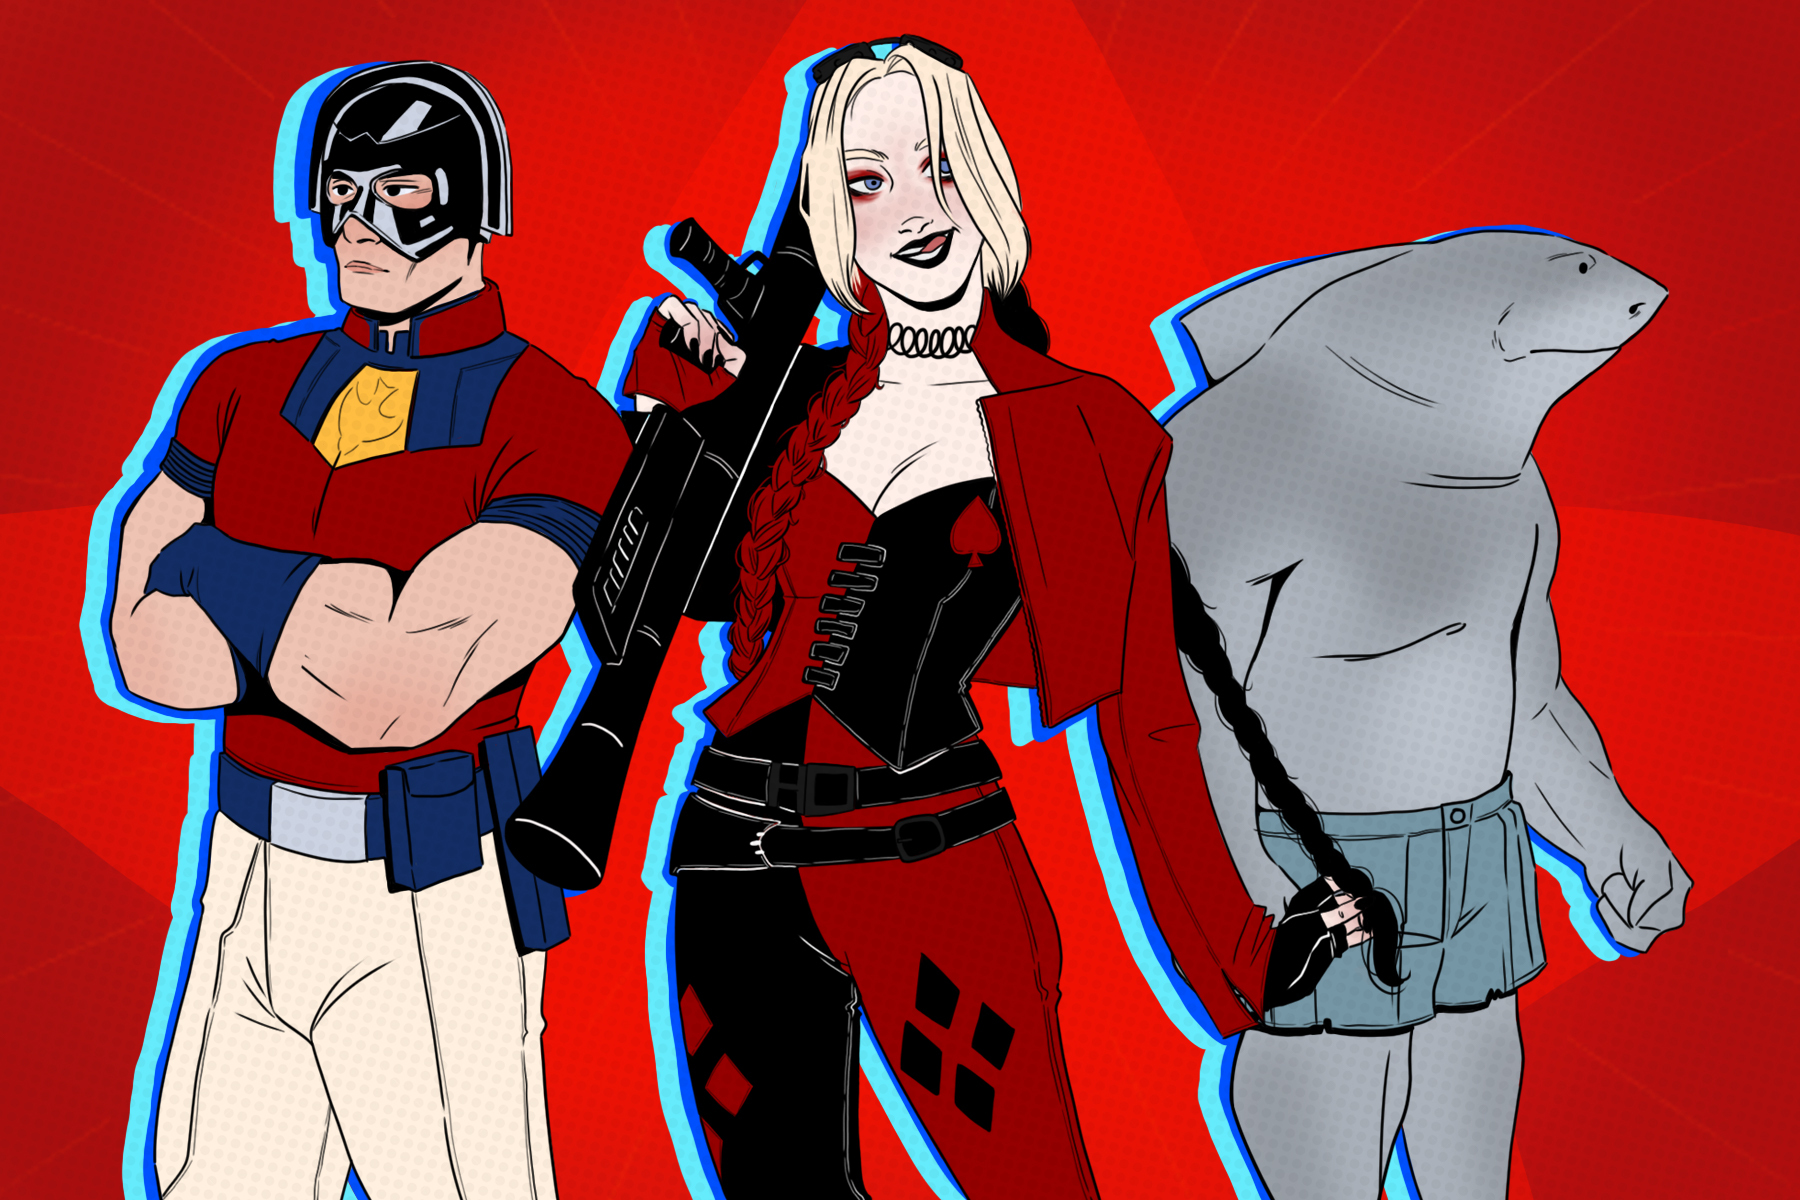 In an article about The Suicide Squad, Peacemaker, Harley Quinn and King Shark stand against a bright red background.